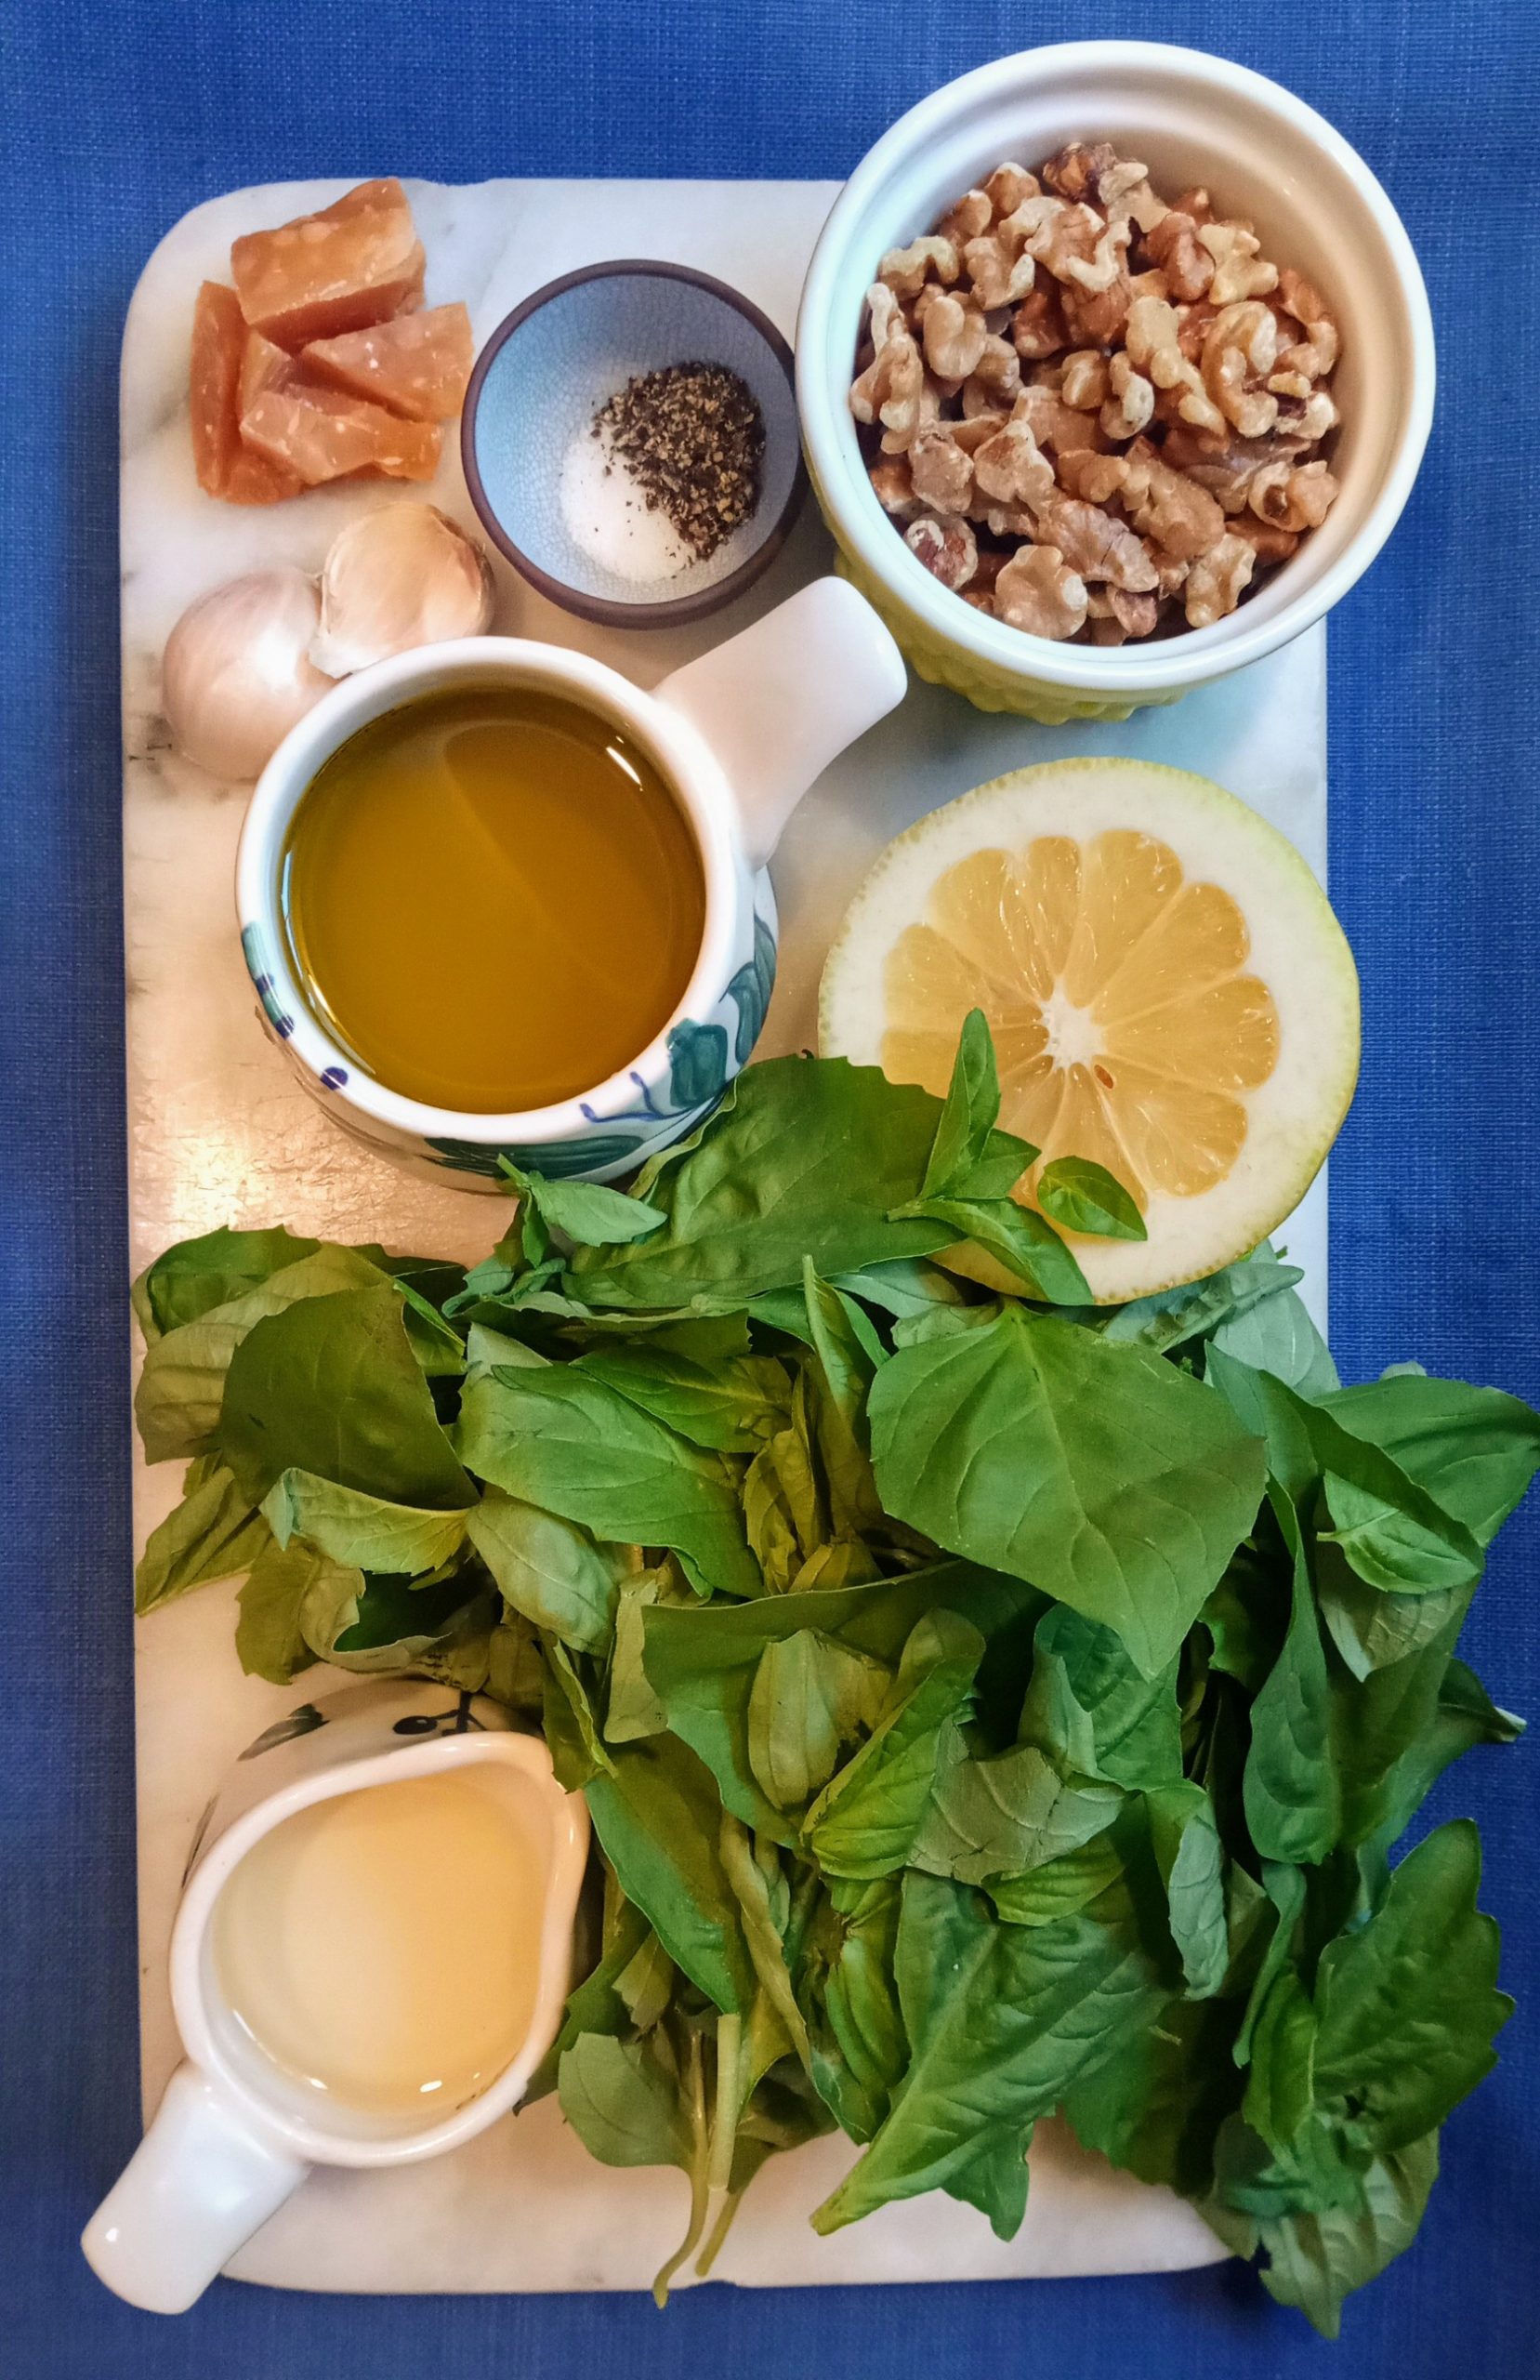 Basil and walnut pesto can enrich numerous meals